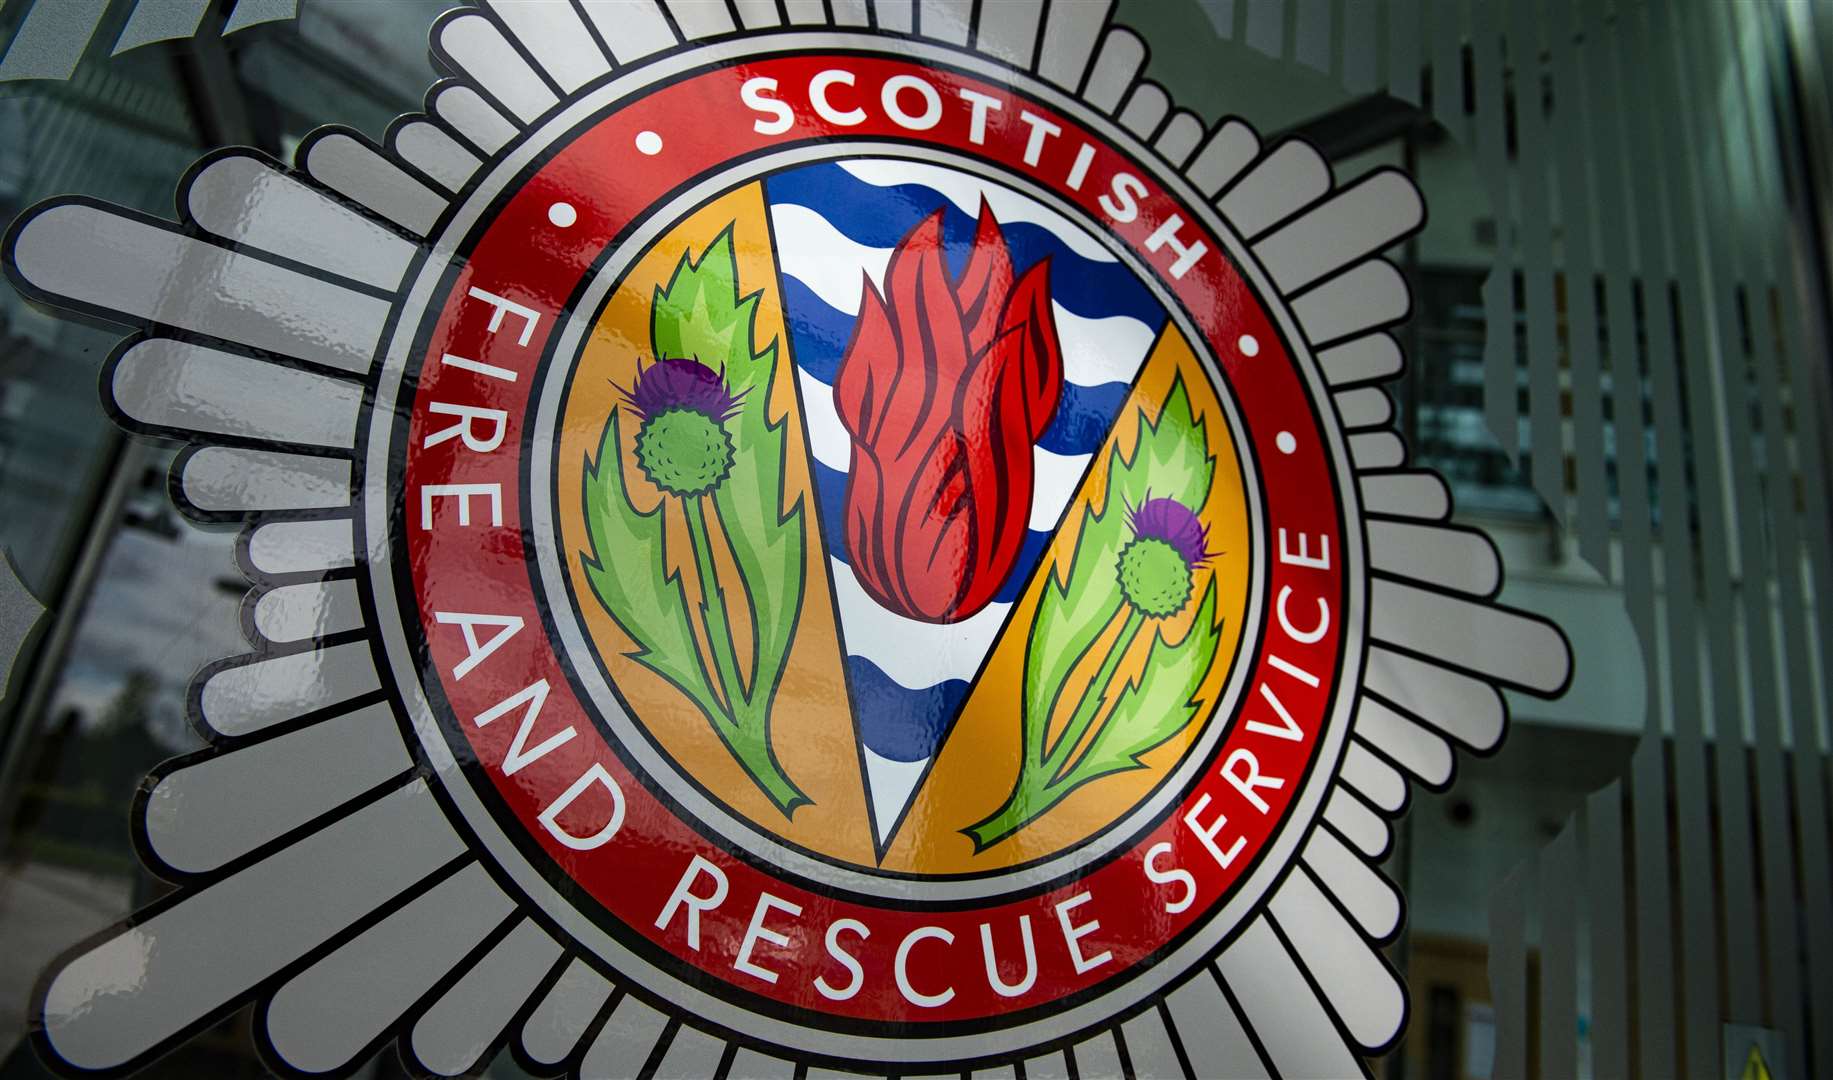 The Scottish Fire and Rescue Service is urging people to make sure they remain safe in their homes.